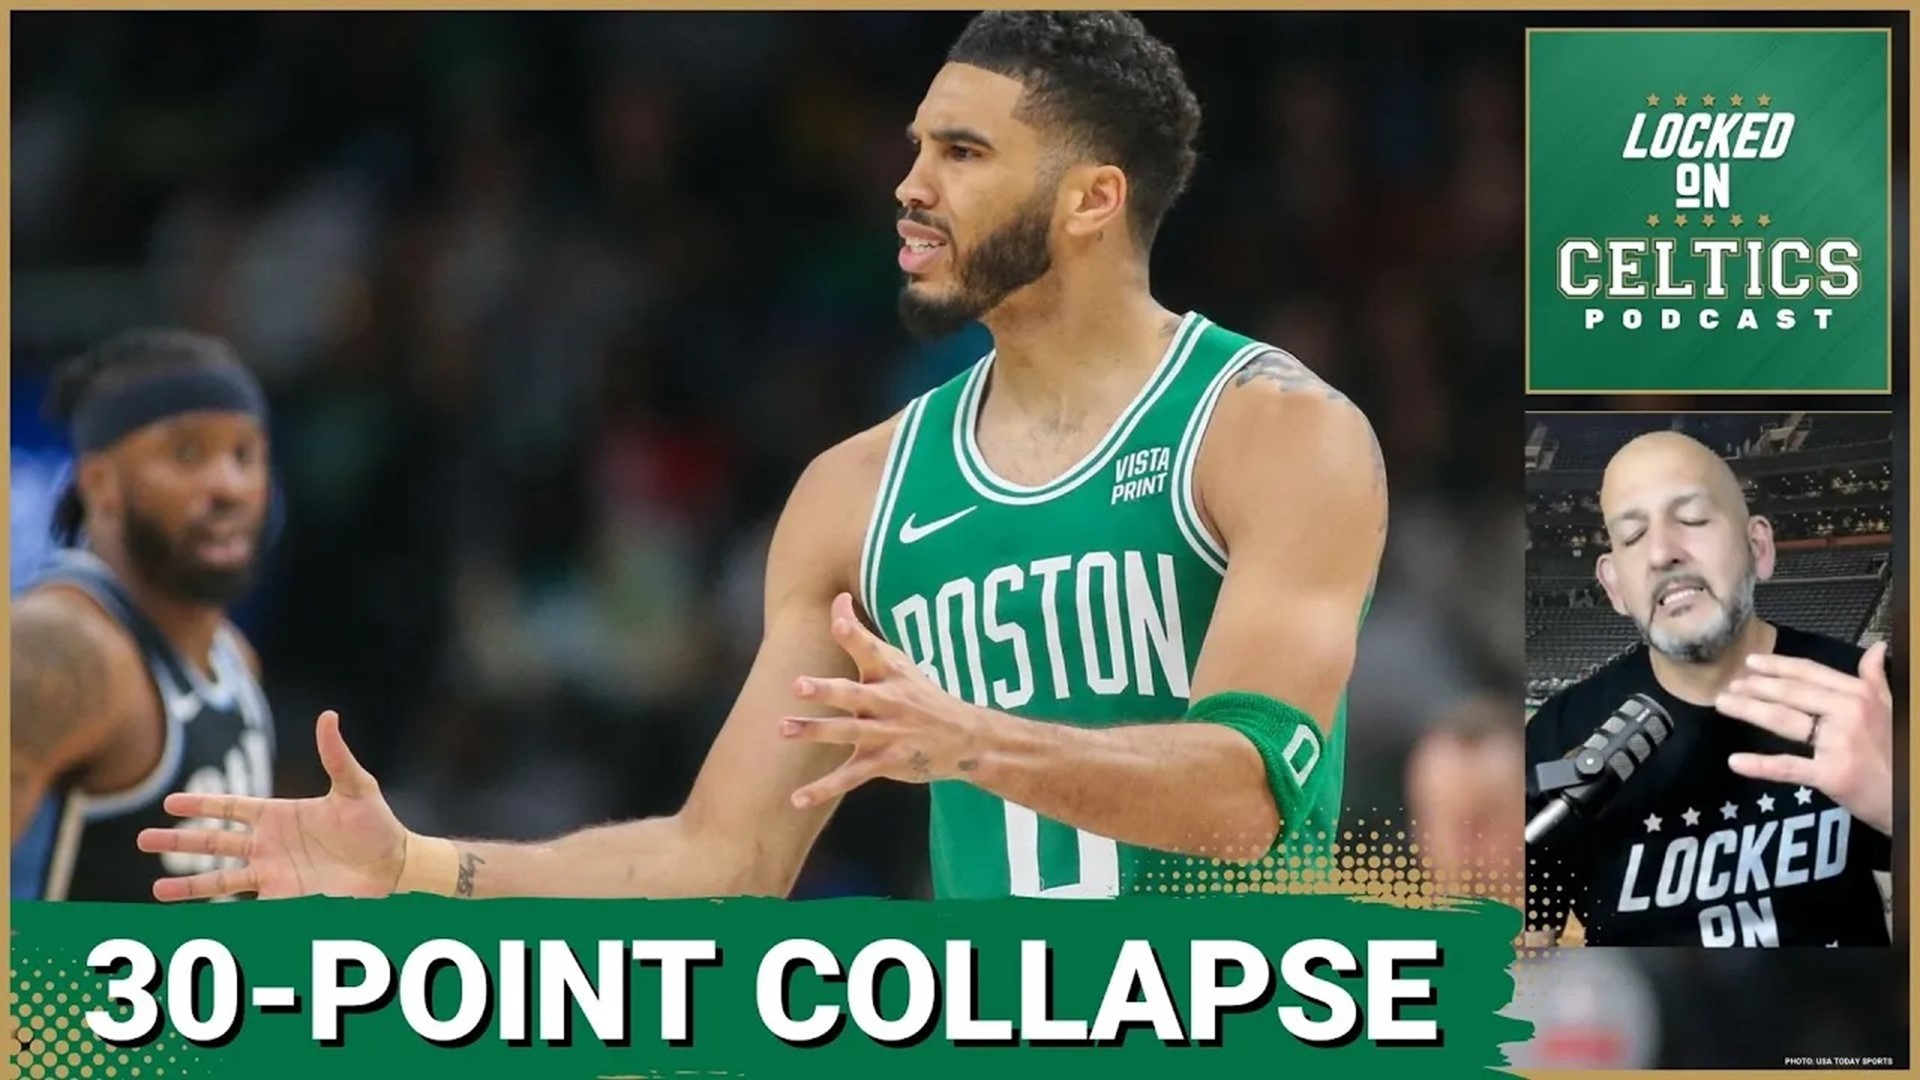 Everything was looking great through about 18 minutes or so as the Celtics were building a 30-point lead in Atlanta, but then the Celtics completely got bored.